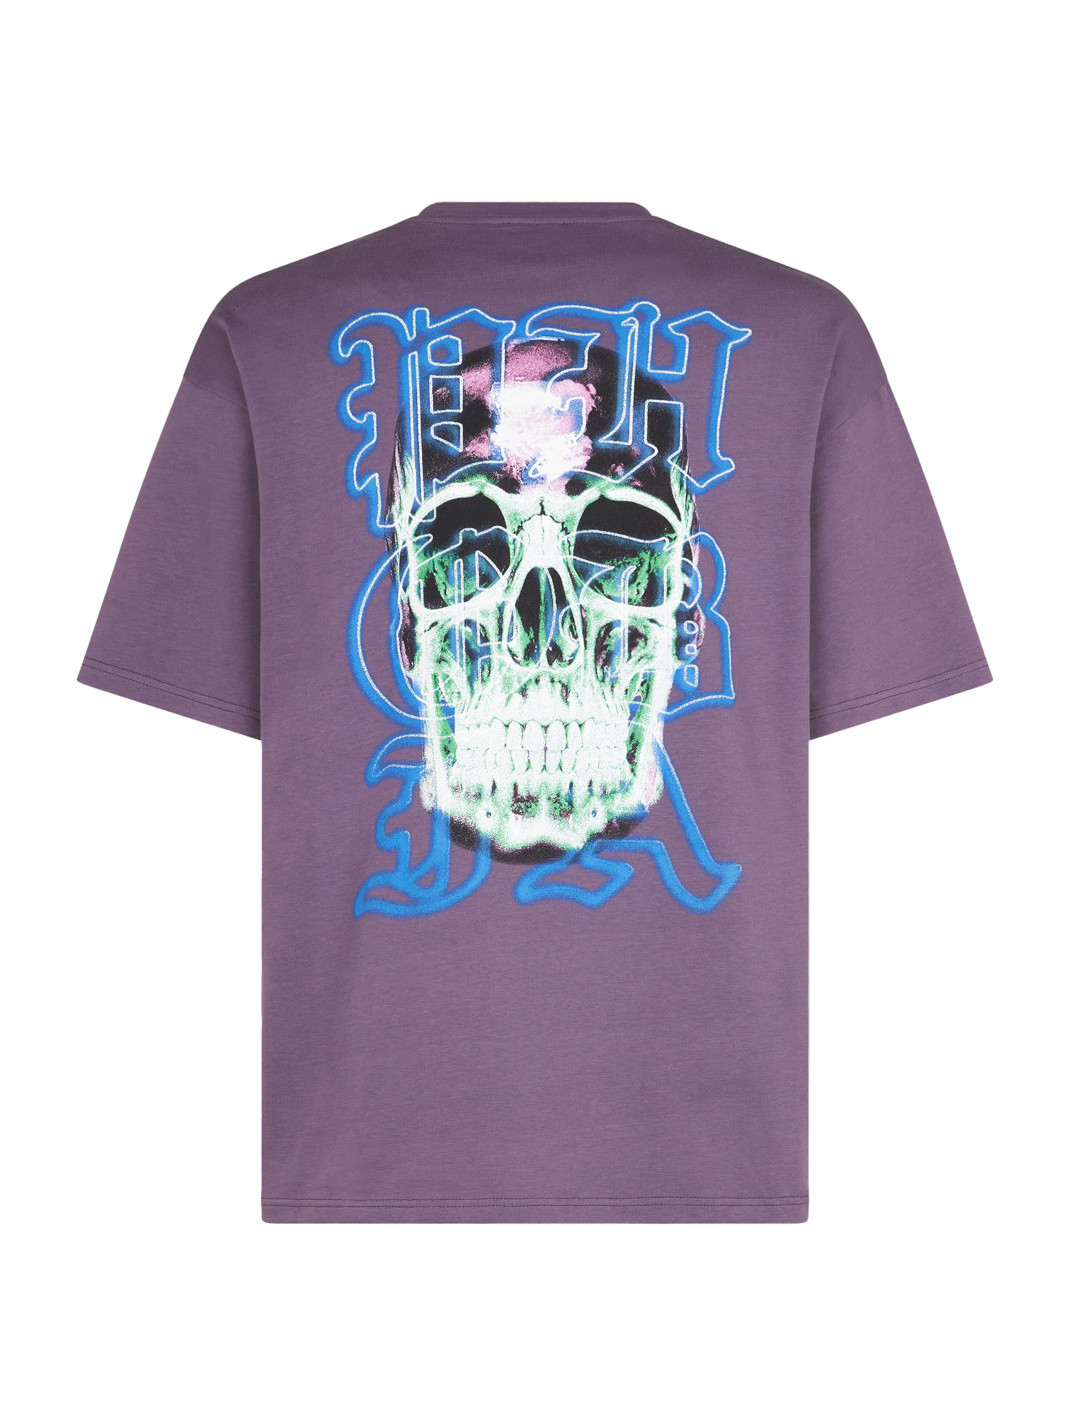 Phobia - Cotton T-shirt with print, Purple, large image number 3